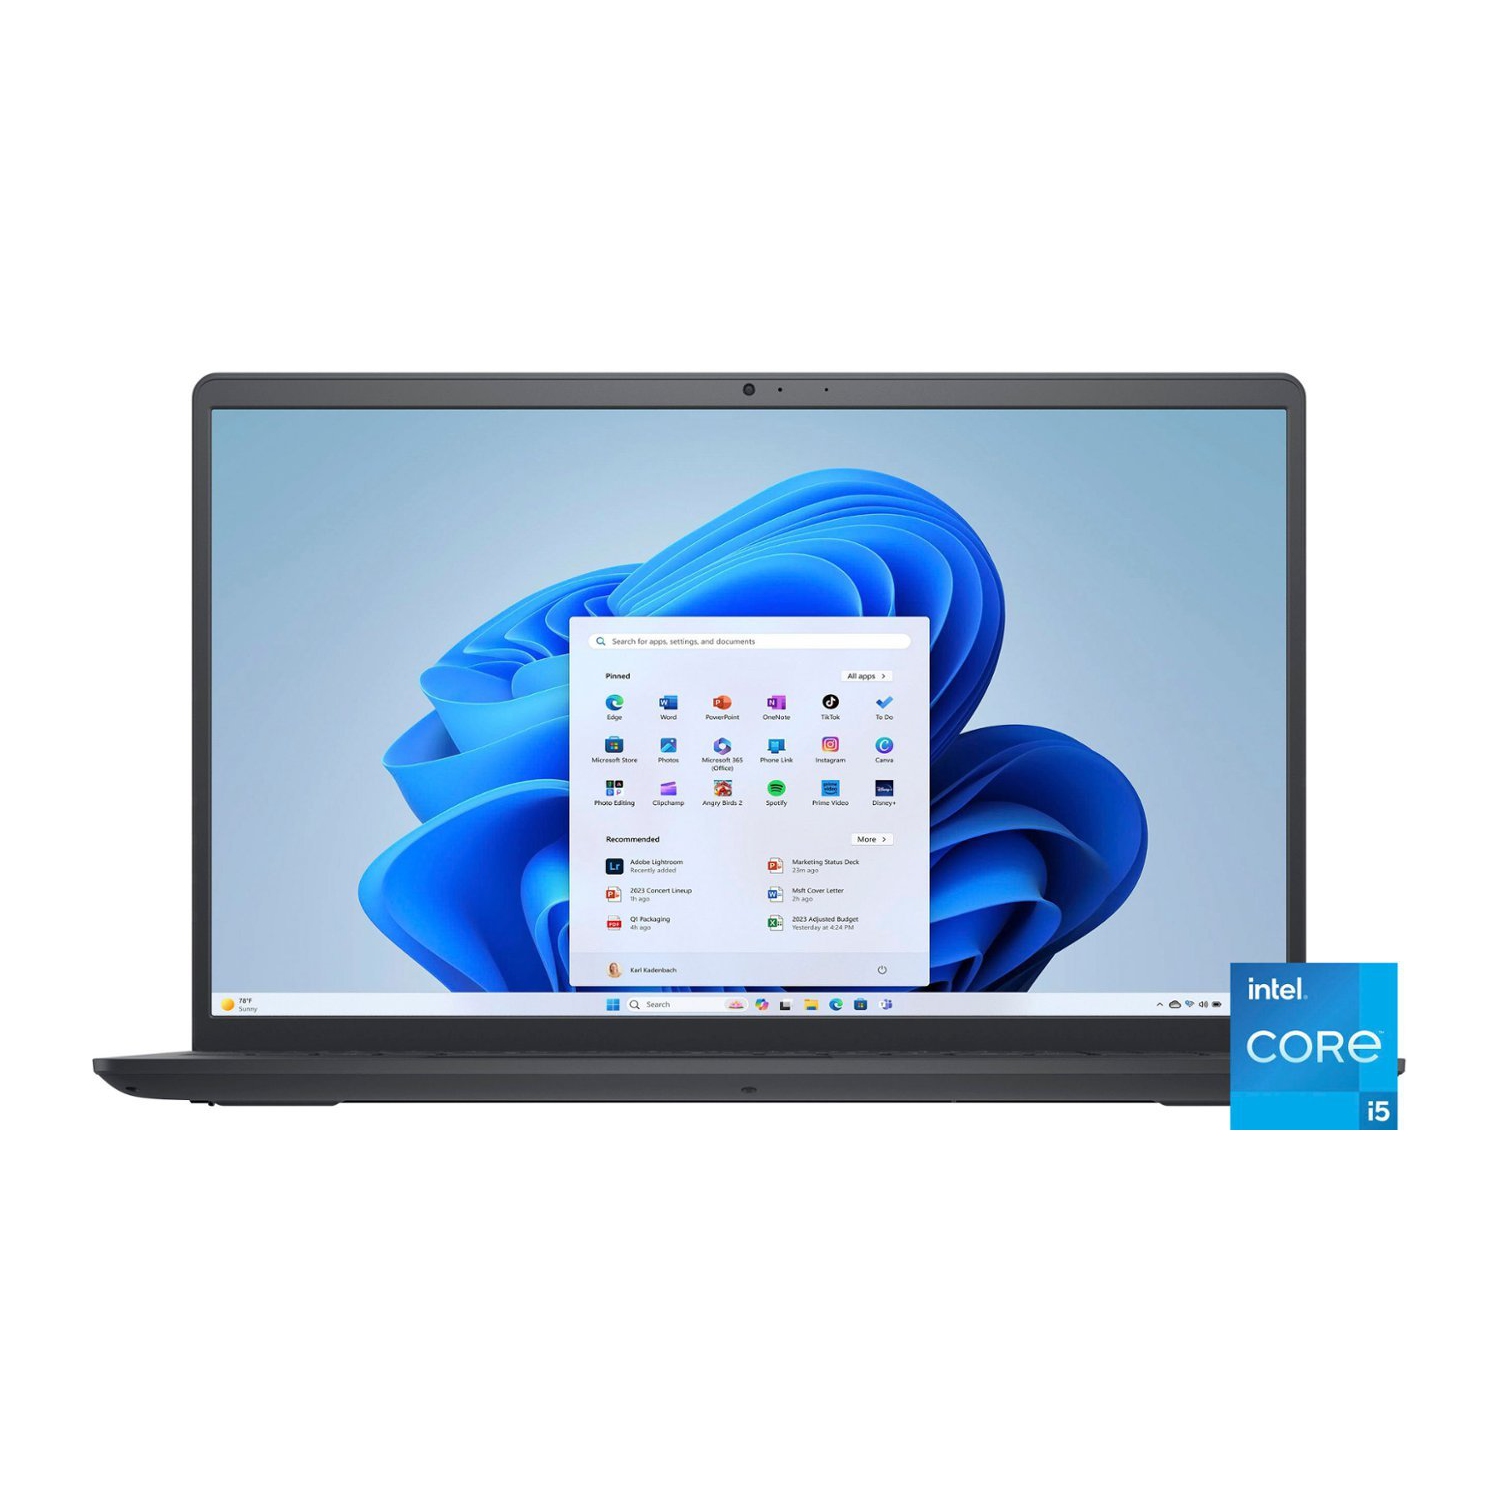 Dell - Inspiron 15.6" 3520 FHD 1920 x 1080 Touch Screen Laptop - Intel Core i5 - 8GB Memory - 256GB SSD PCIE - Carbon Black - Windows 11 Home S mode